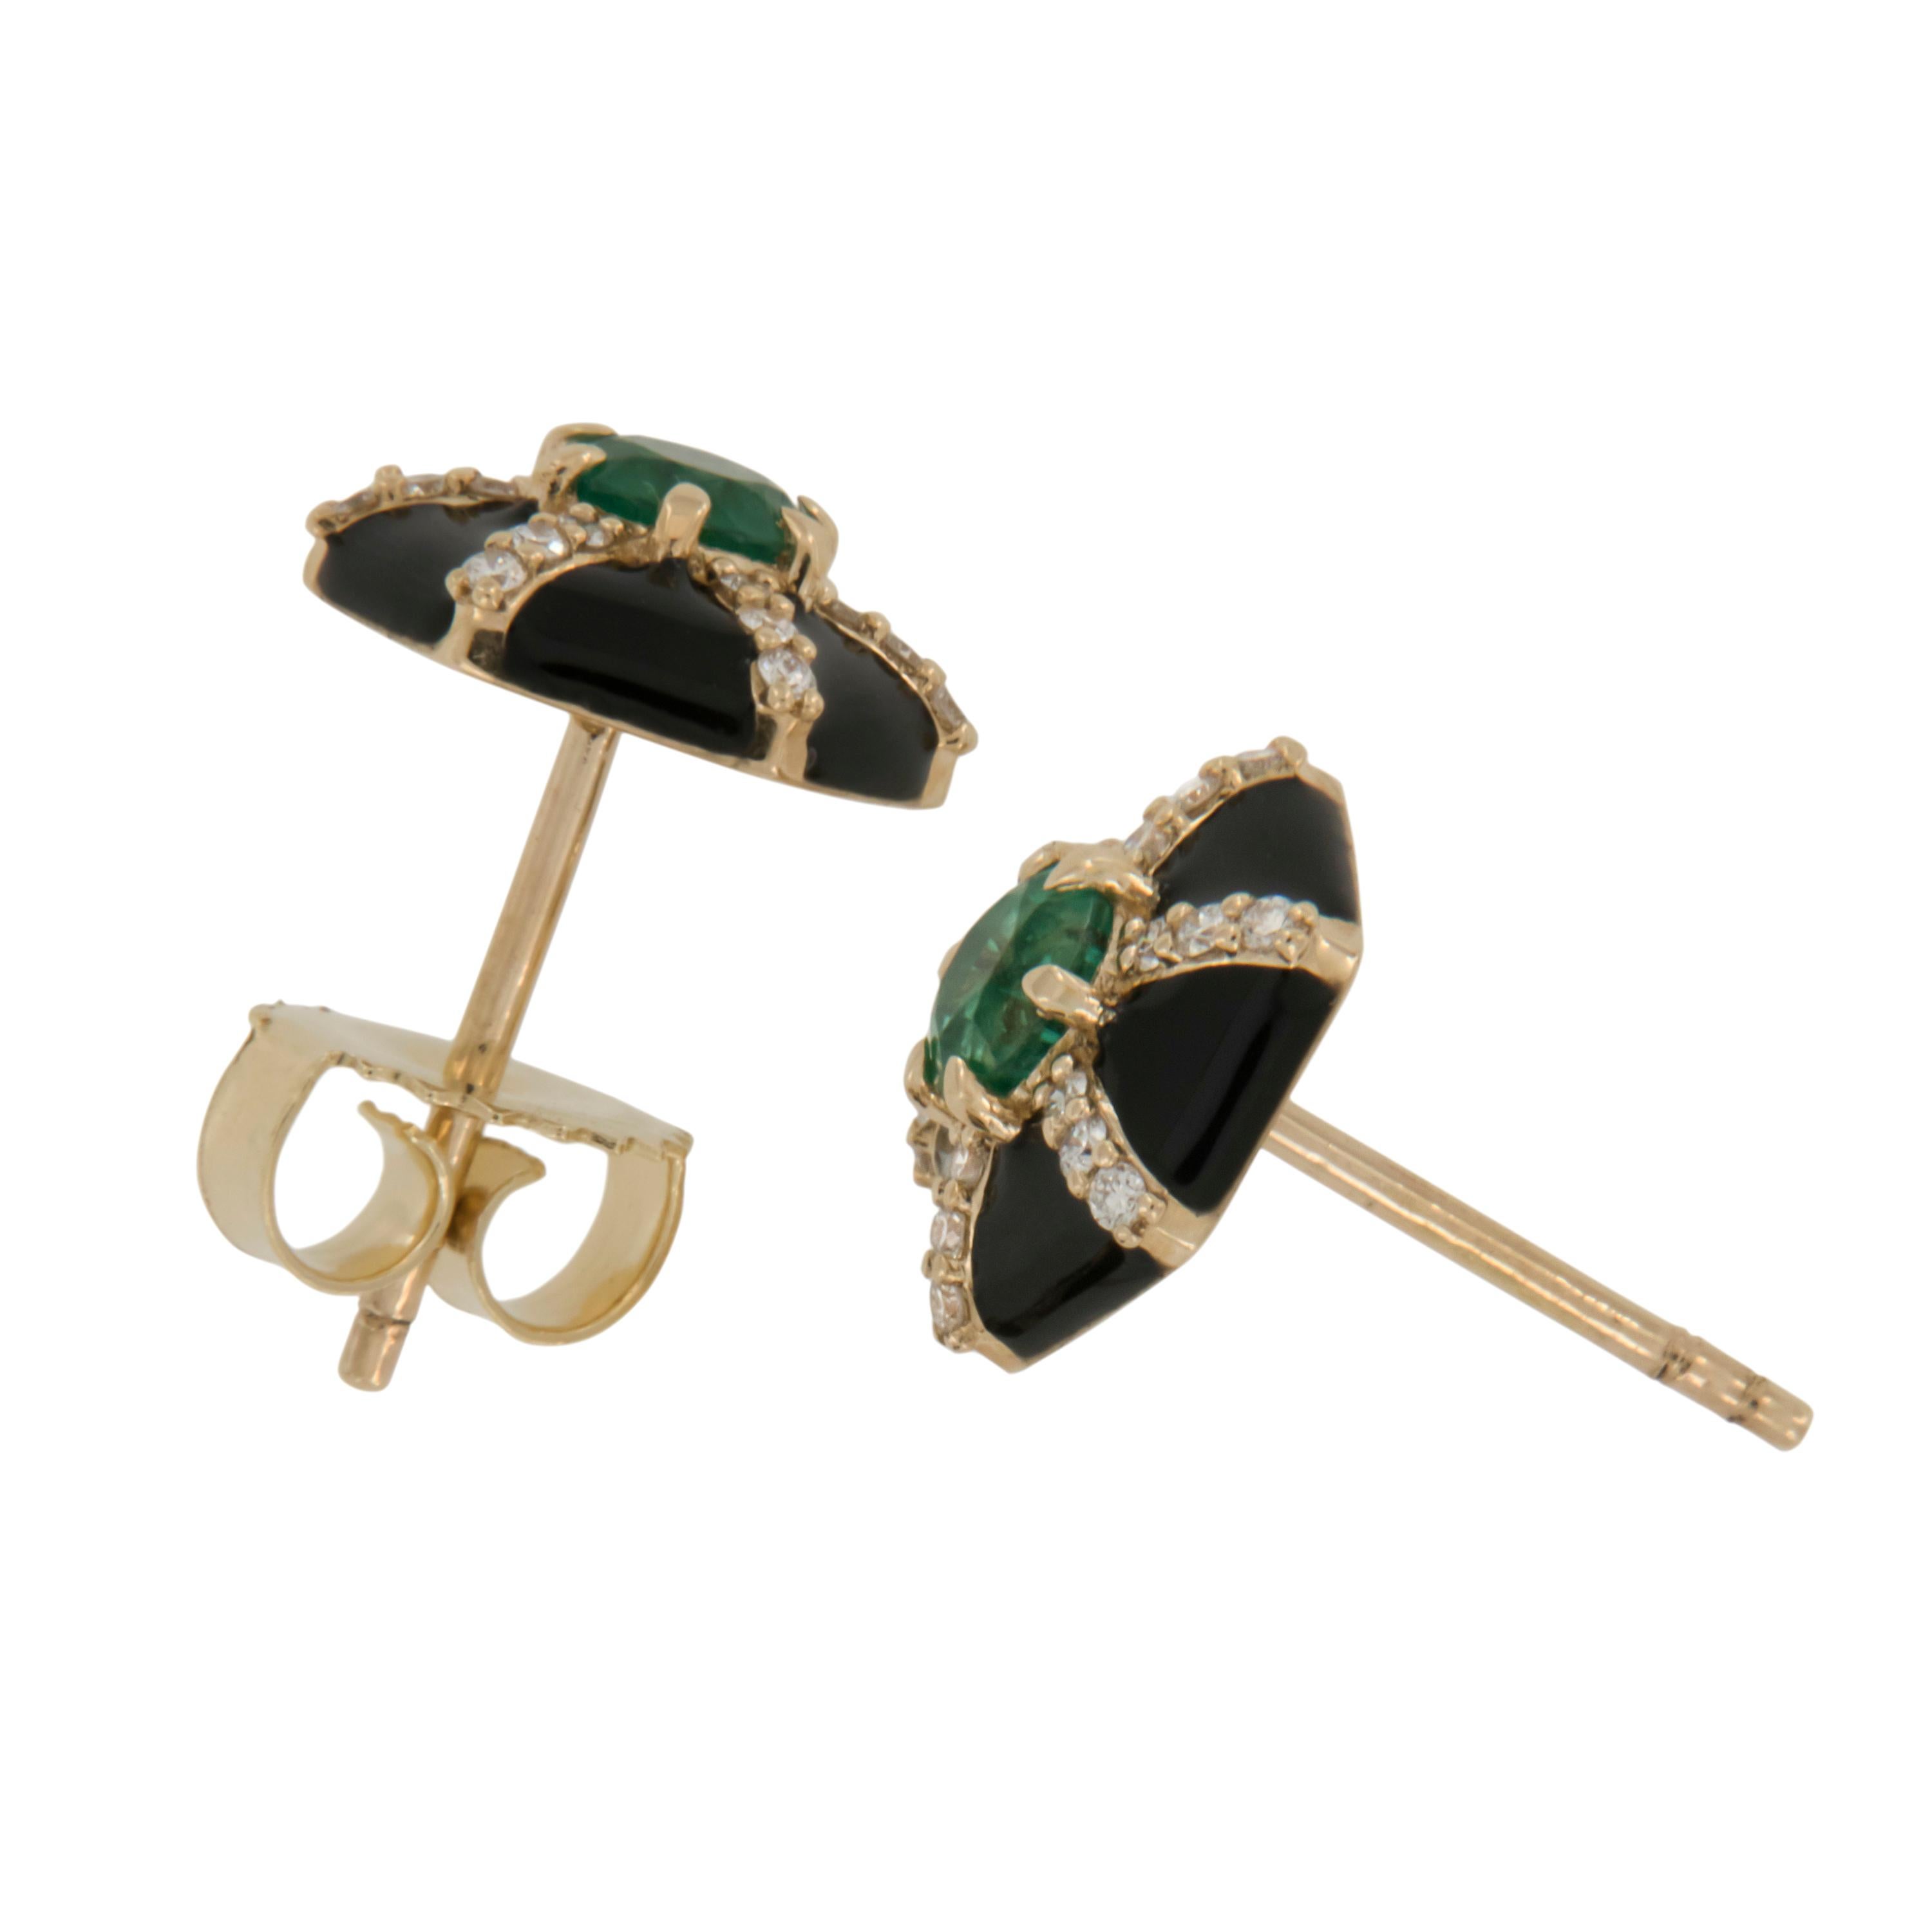 The Queen Collection was inspired by royalty, but with a modern twist. The combination of enamel, diamonds & emerald represents power, richness and passion of a true Queen. Made in royal 18k yellow gold these fetching hexagon stud earrings with 0.41